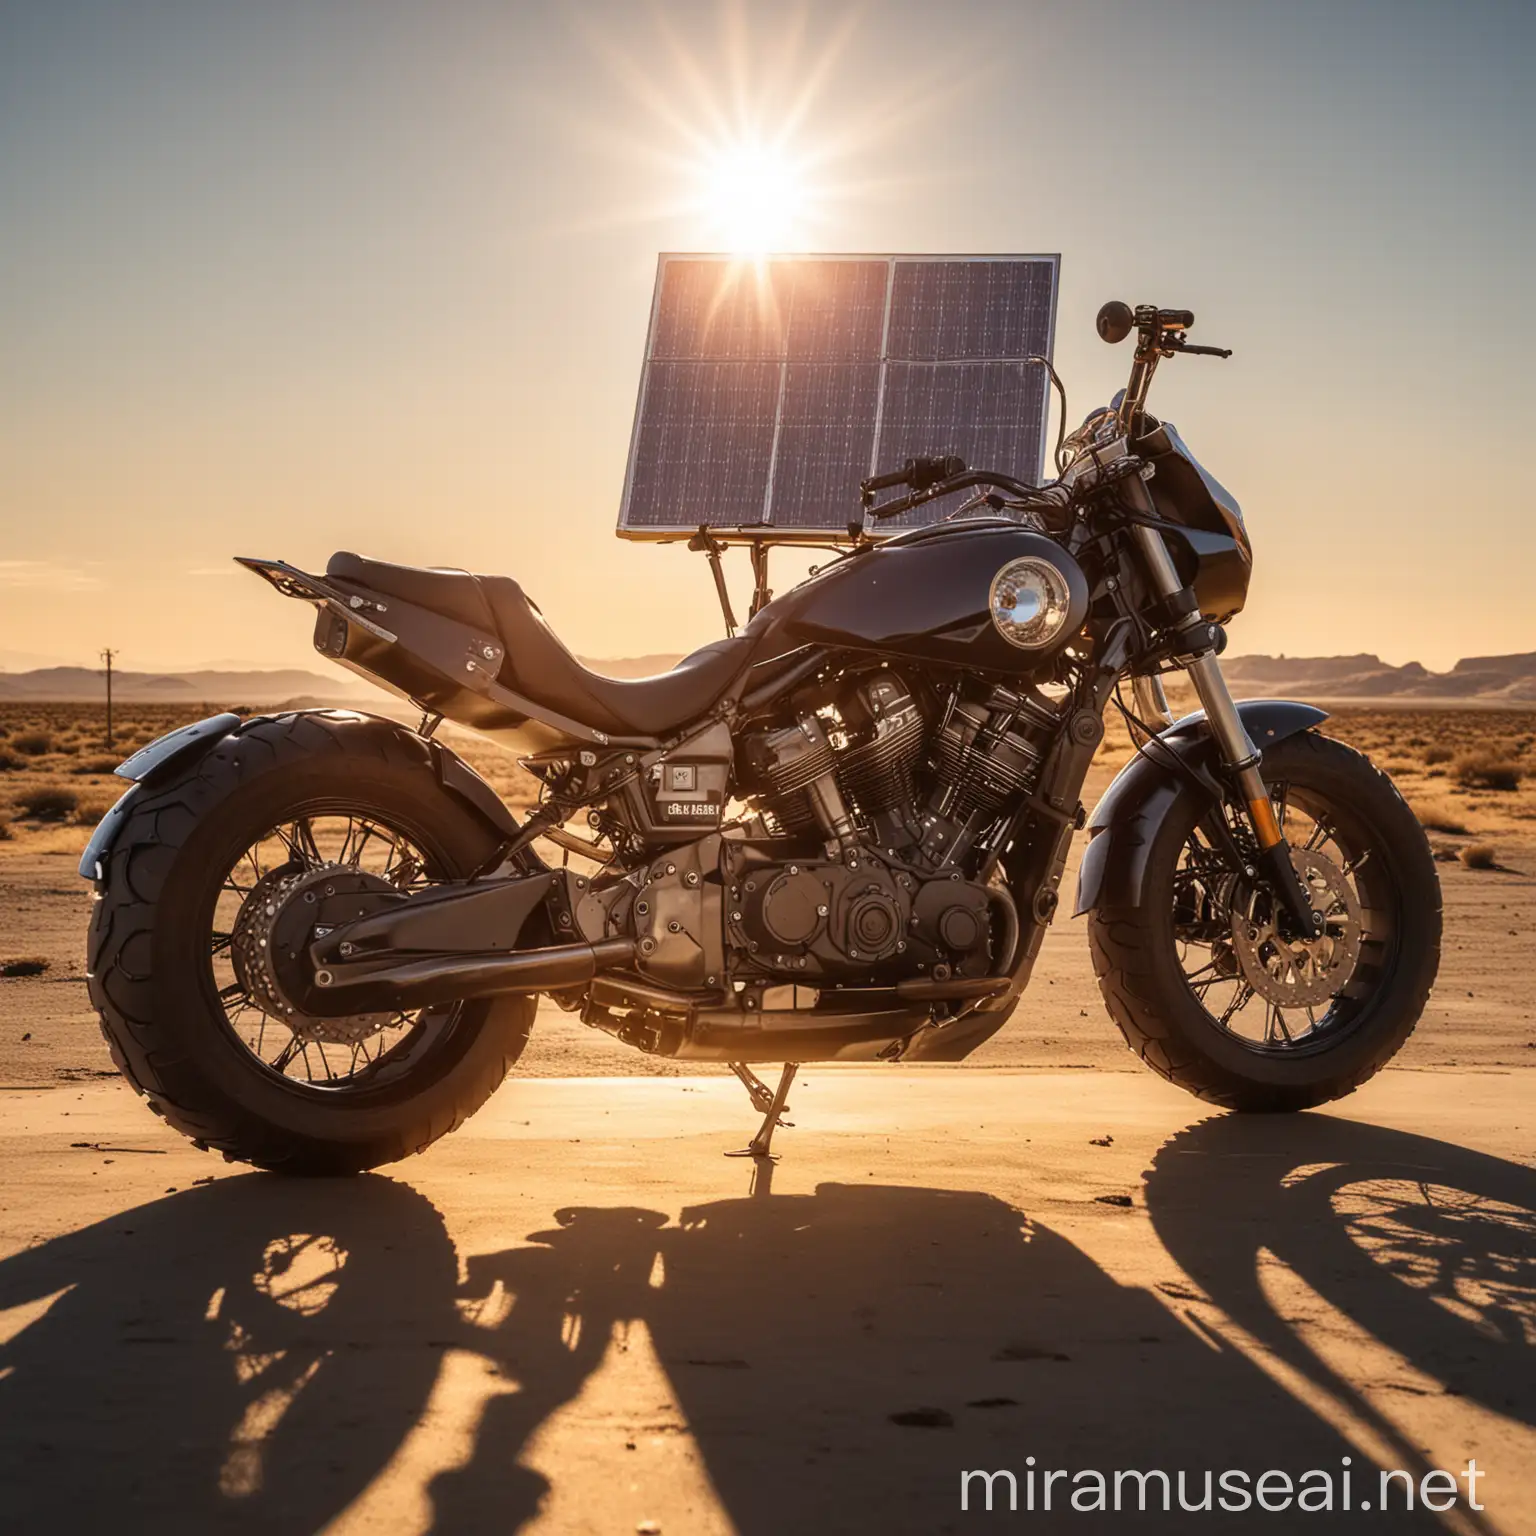 Sunlit Motorcycle with Solar Panel